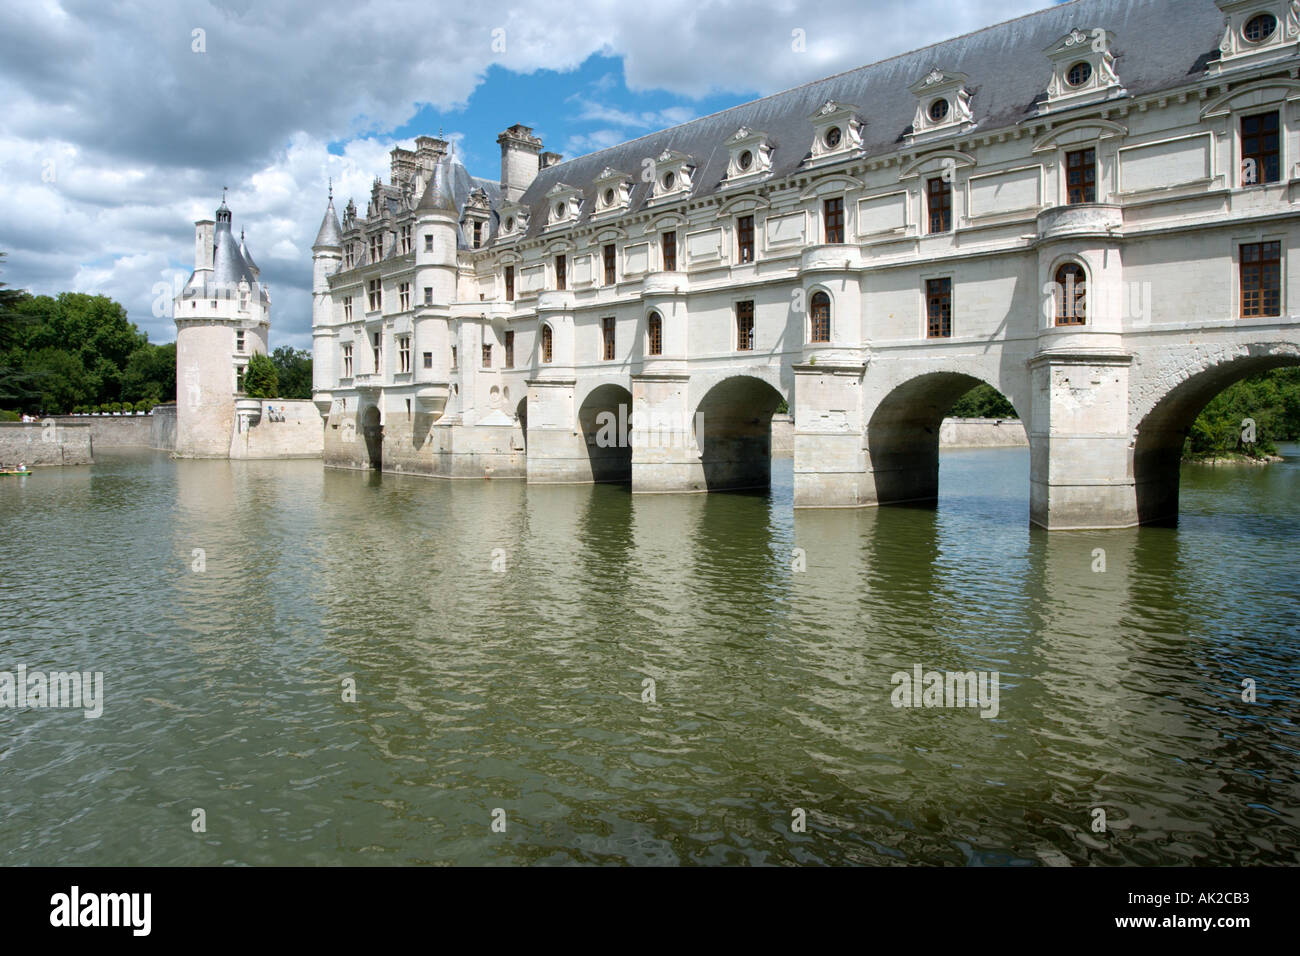 The Chateau de Chenonceau on the River Cher, The Loire Valley, France Stock Photo